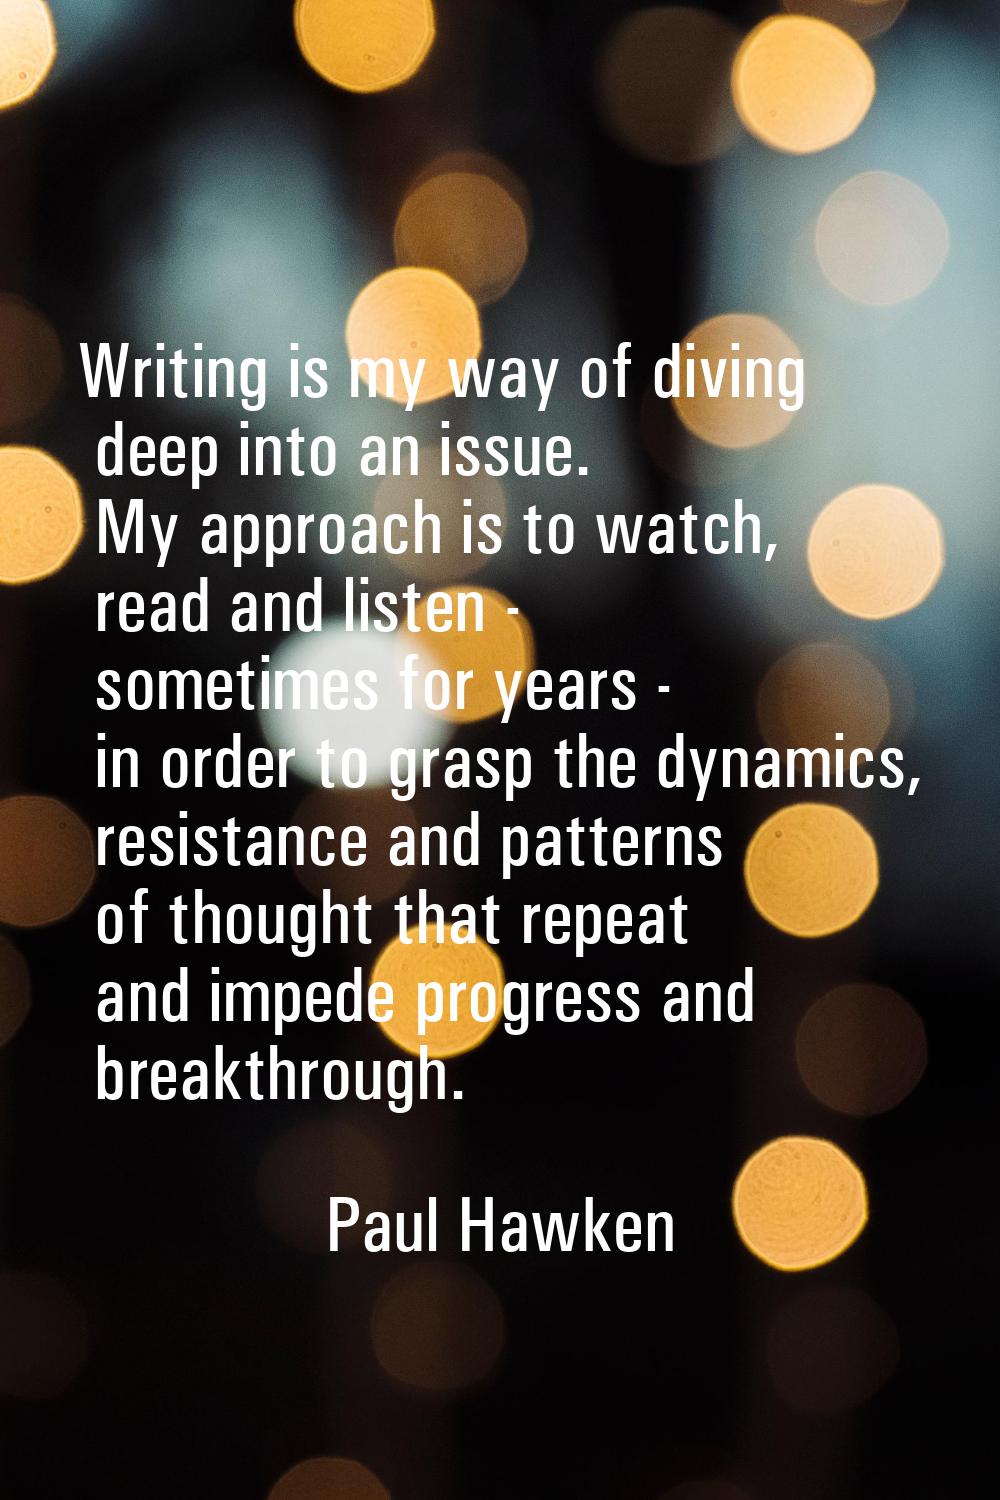 Writing is my way of diving deep into an issue. My approach is to watch, read and listen - sometime